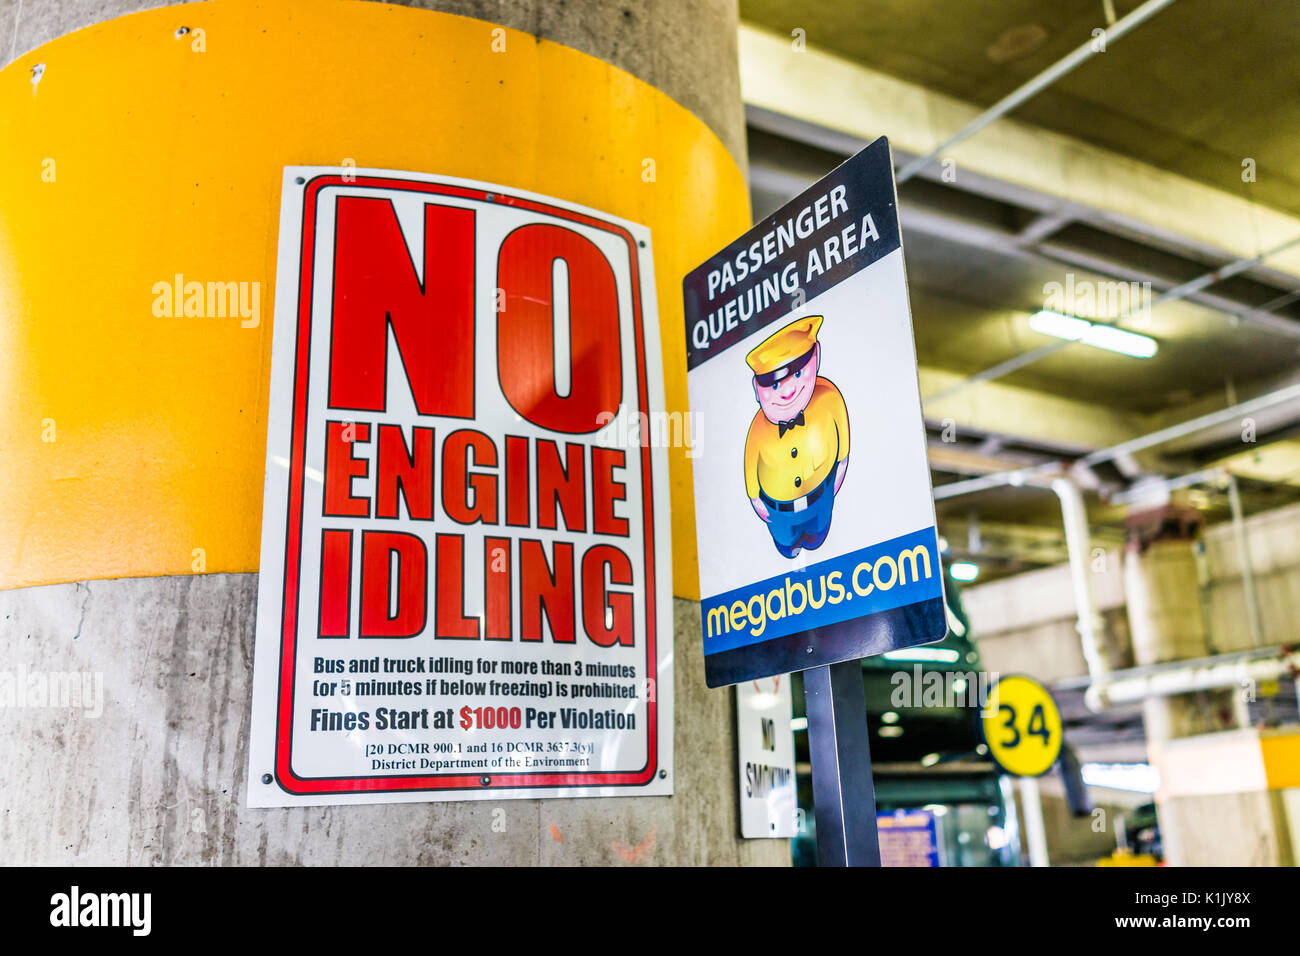 Washington DC, USA - July 1, 2017: Inside Union Station parking garage for buses in capital city with no engine idling sign Stock Photo